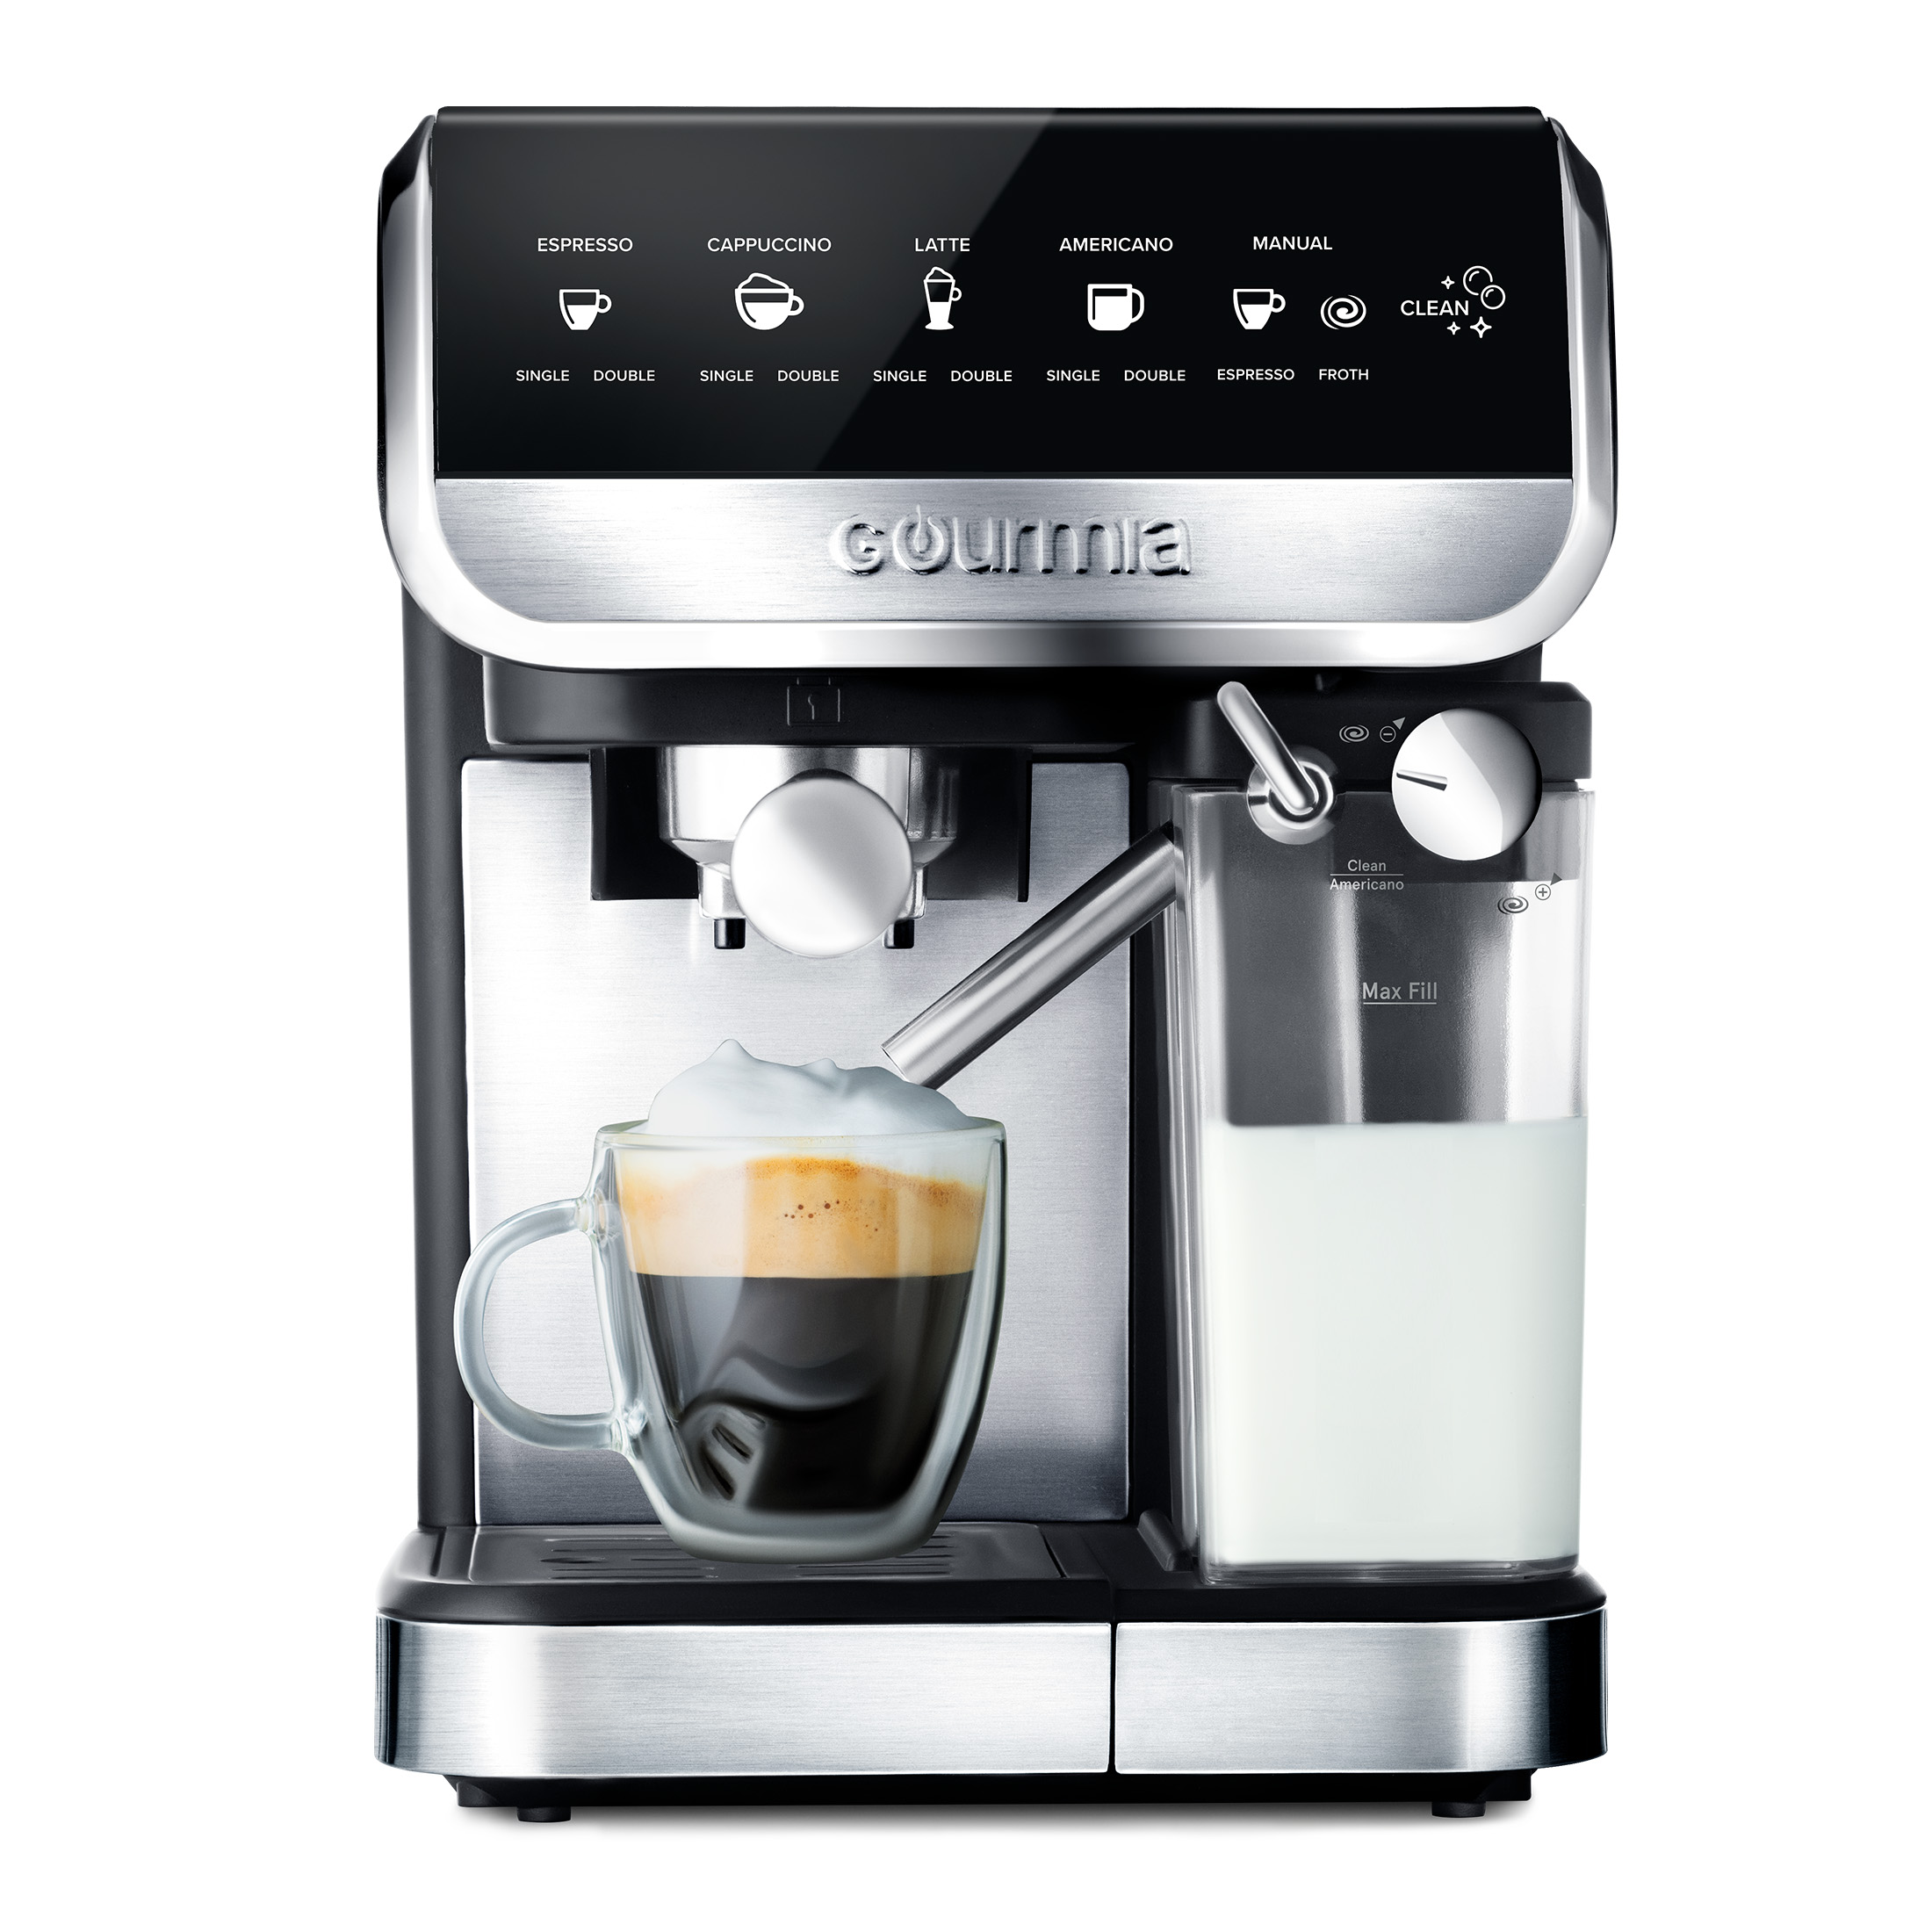 Gourmia Espresso, Cappuccino, Latte & Americano Maker with Automatic Frothing - image 4 of 9